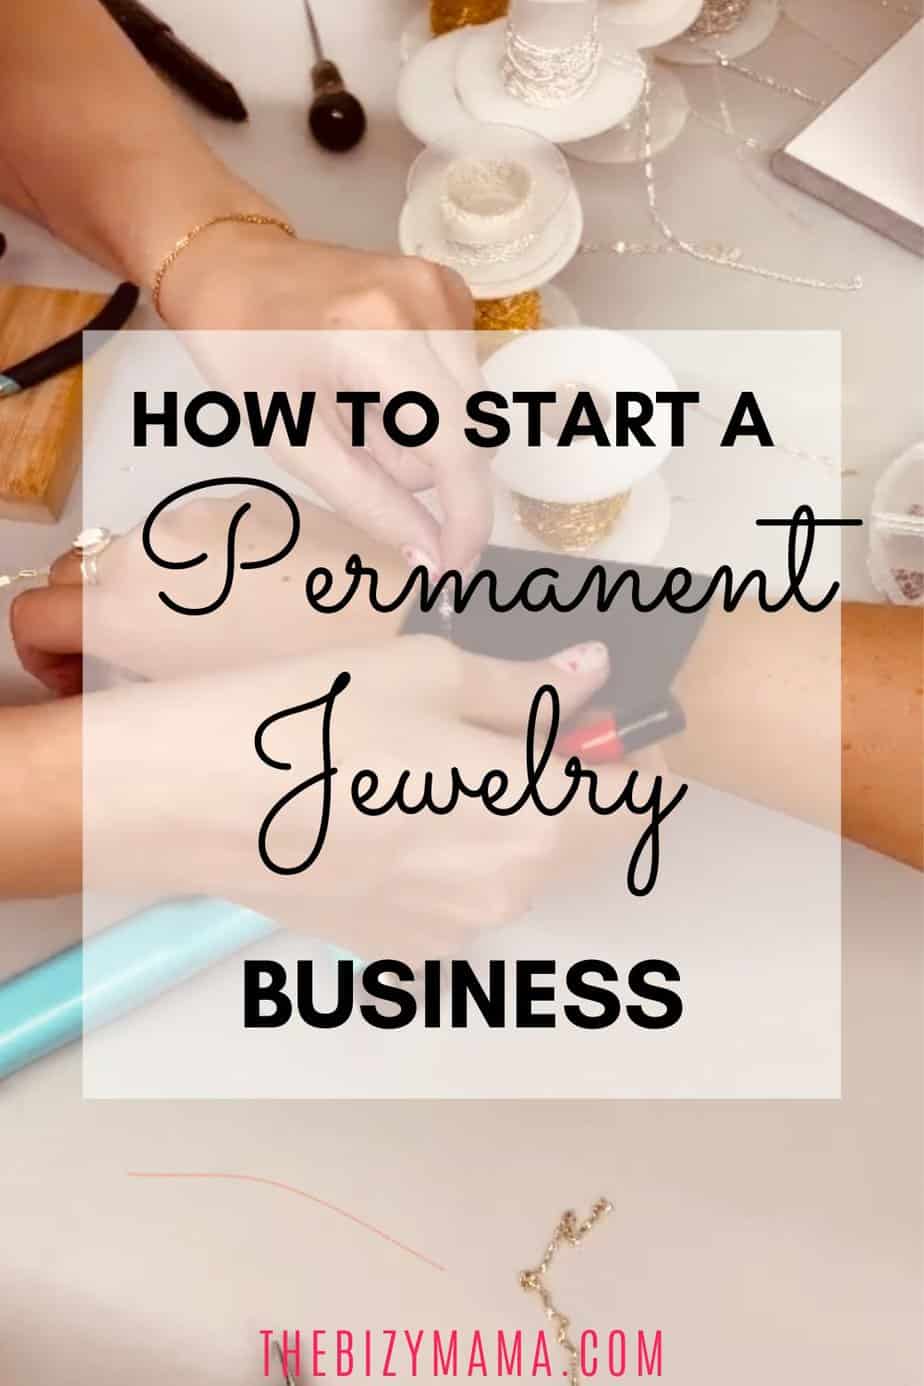 Permanent Jewelry starter kit for Beginners, Orion Mpulse Welder and T –  Chains and Findings